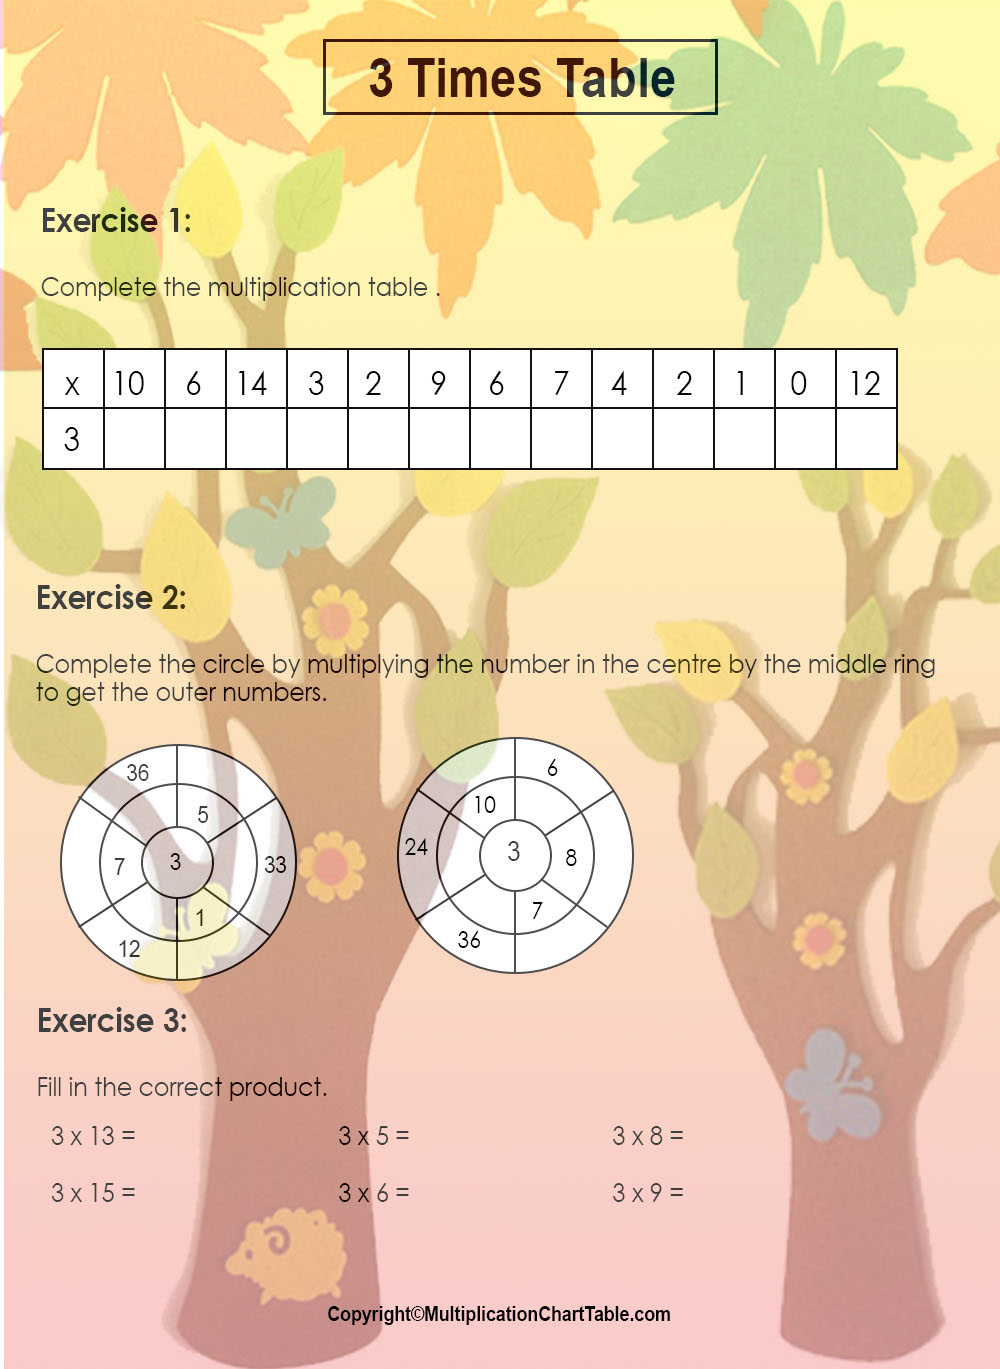 3 times table worksheets